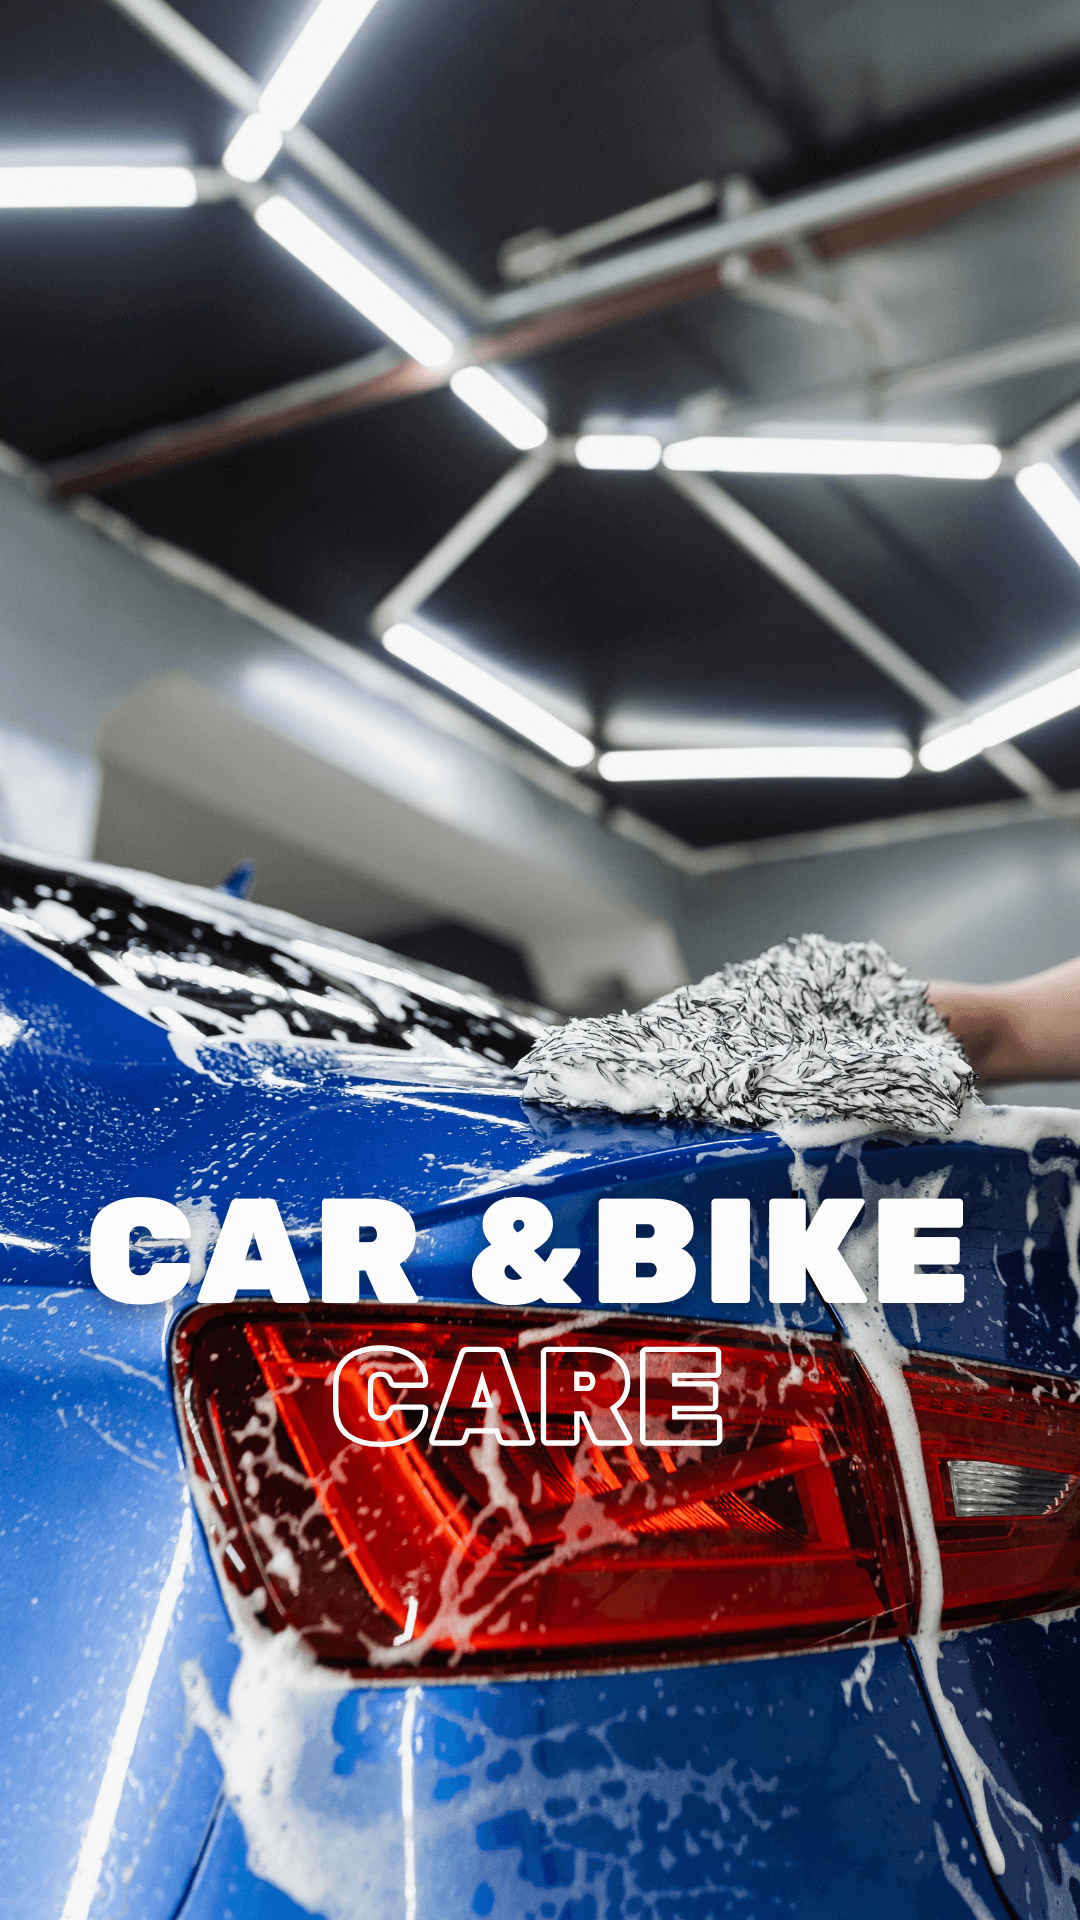 Meticulous care for every ride.